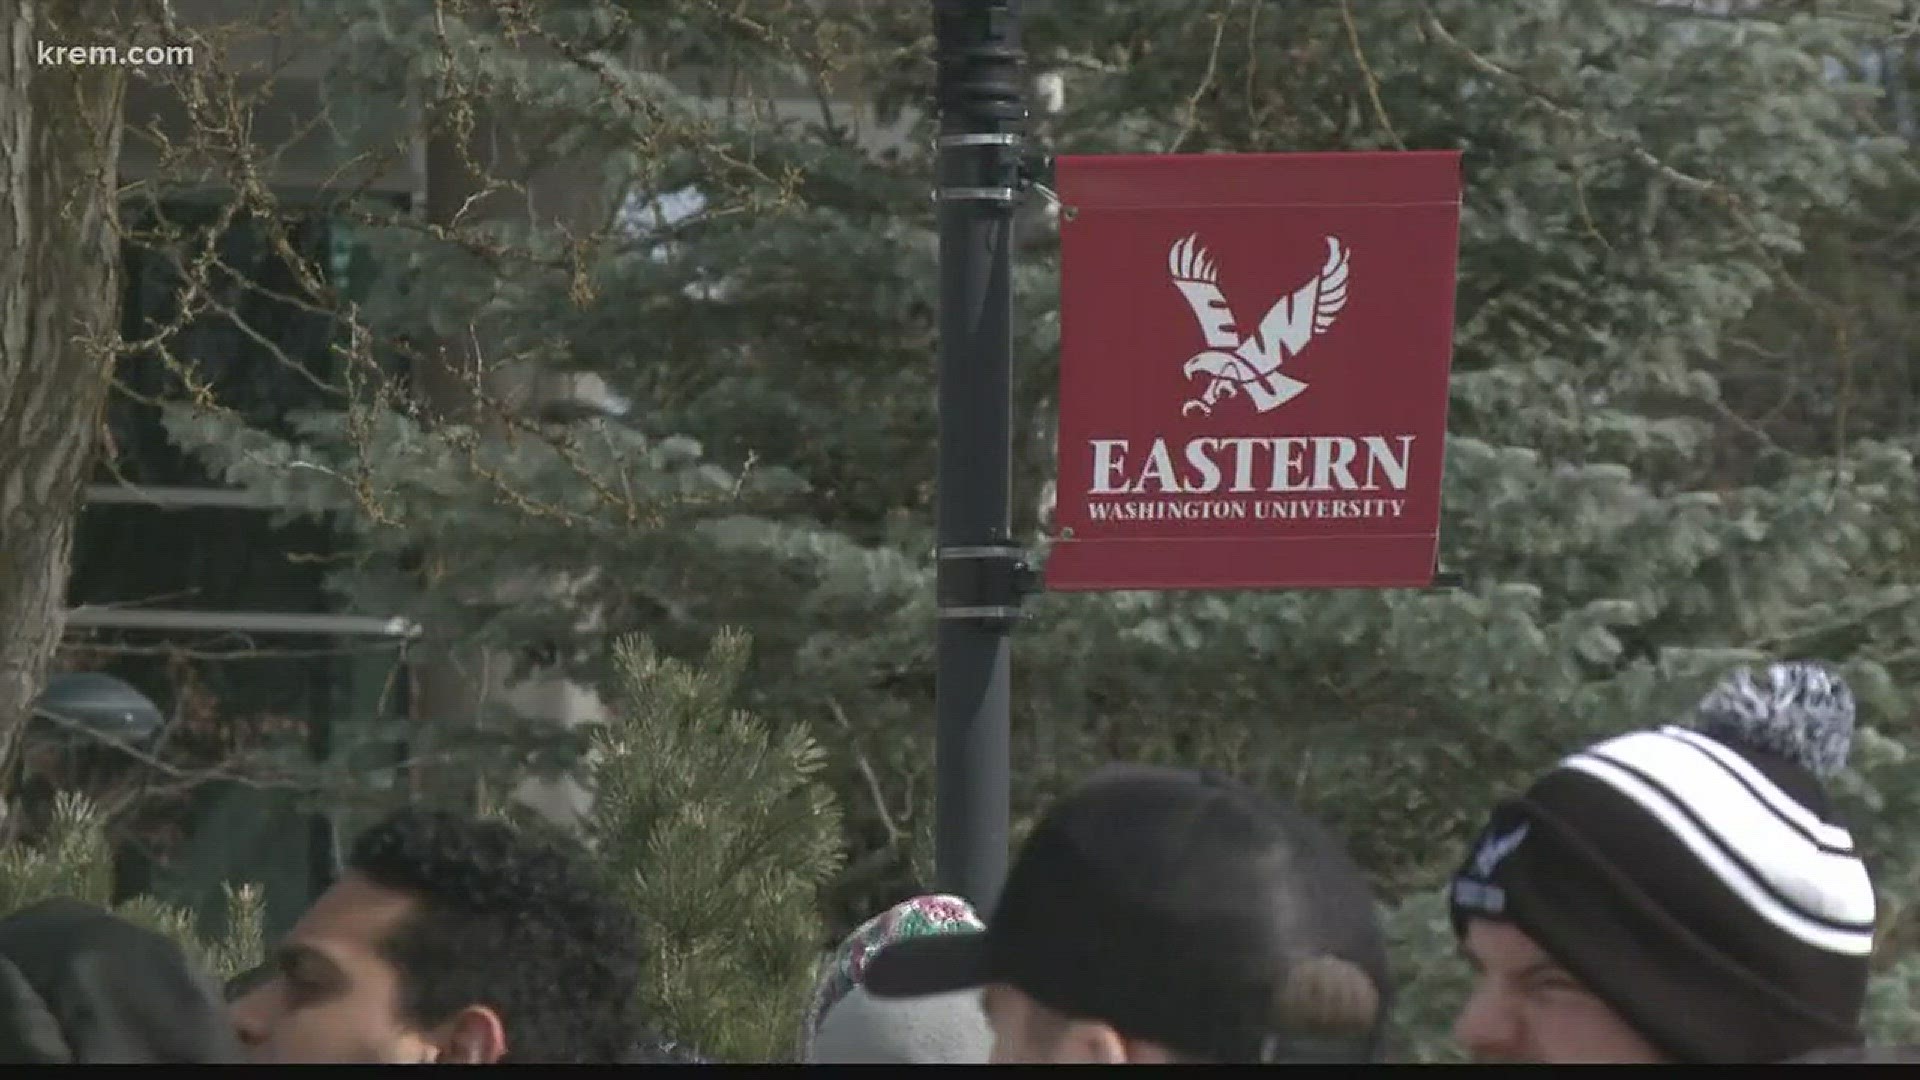 KREM 2's Alexa Block shows how today, Eastern Washington came together to spread a different type of message.